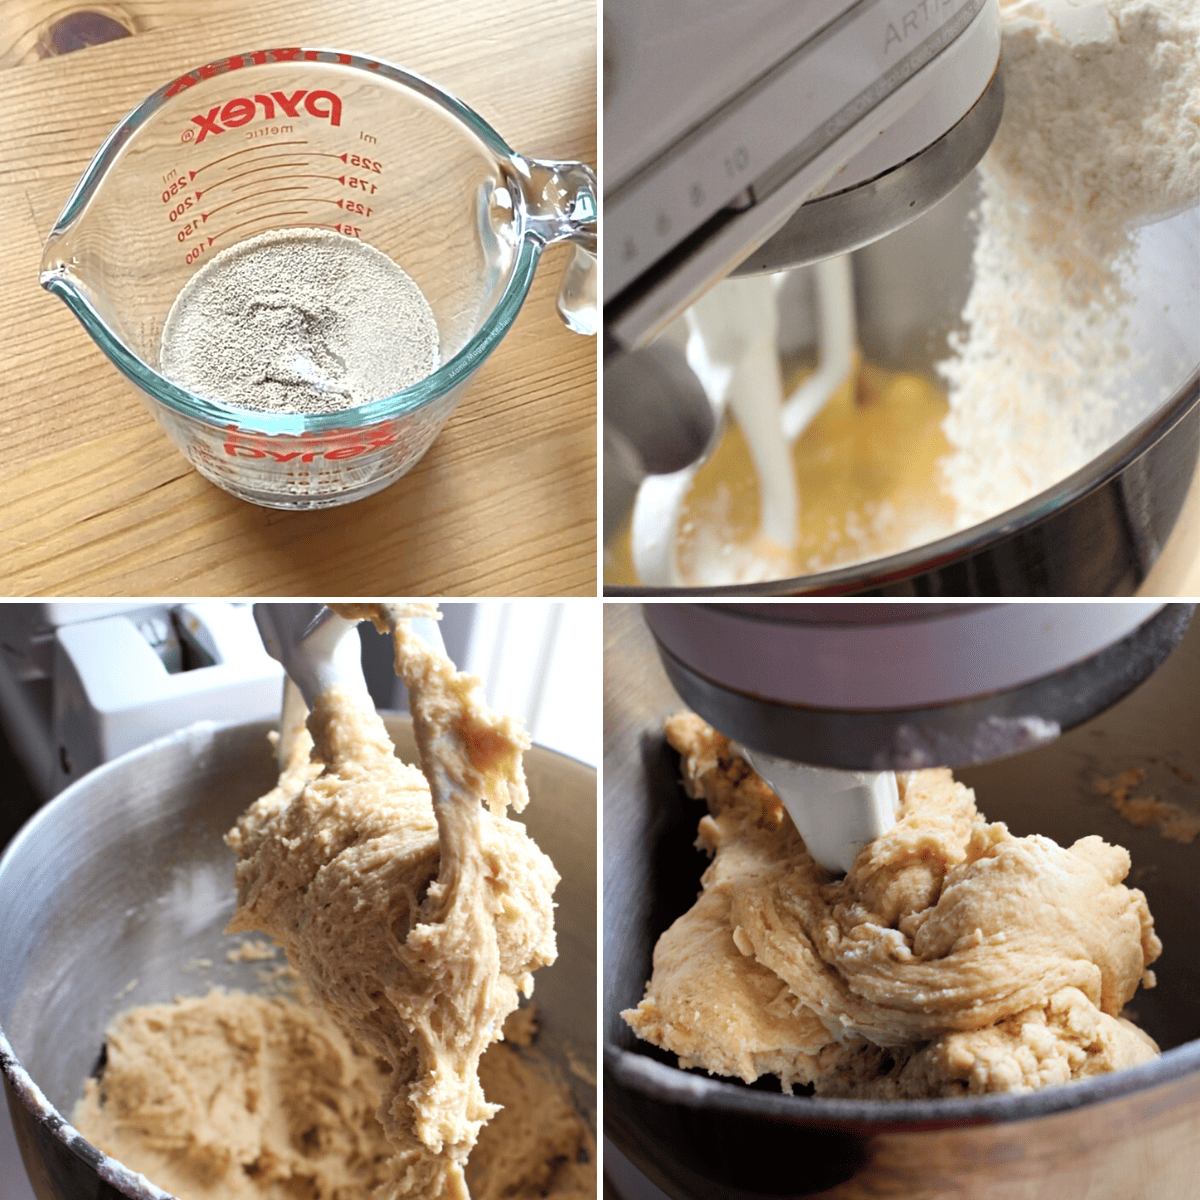 The bread dough mixing in a kitchen mixer.